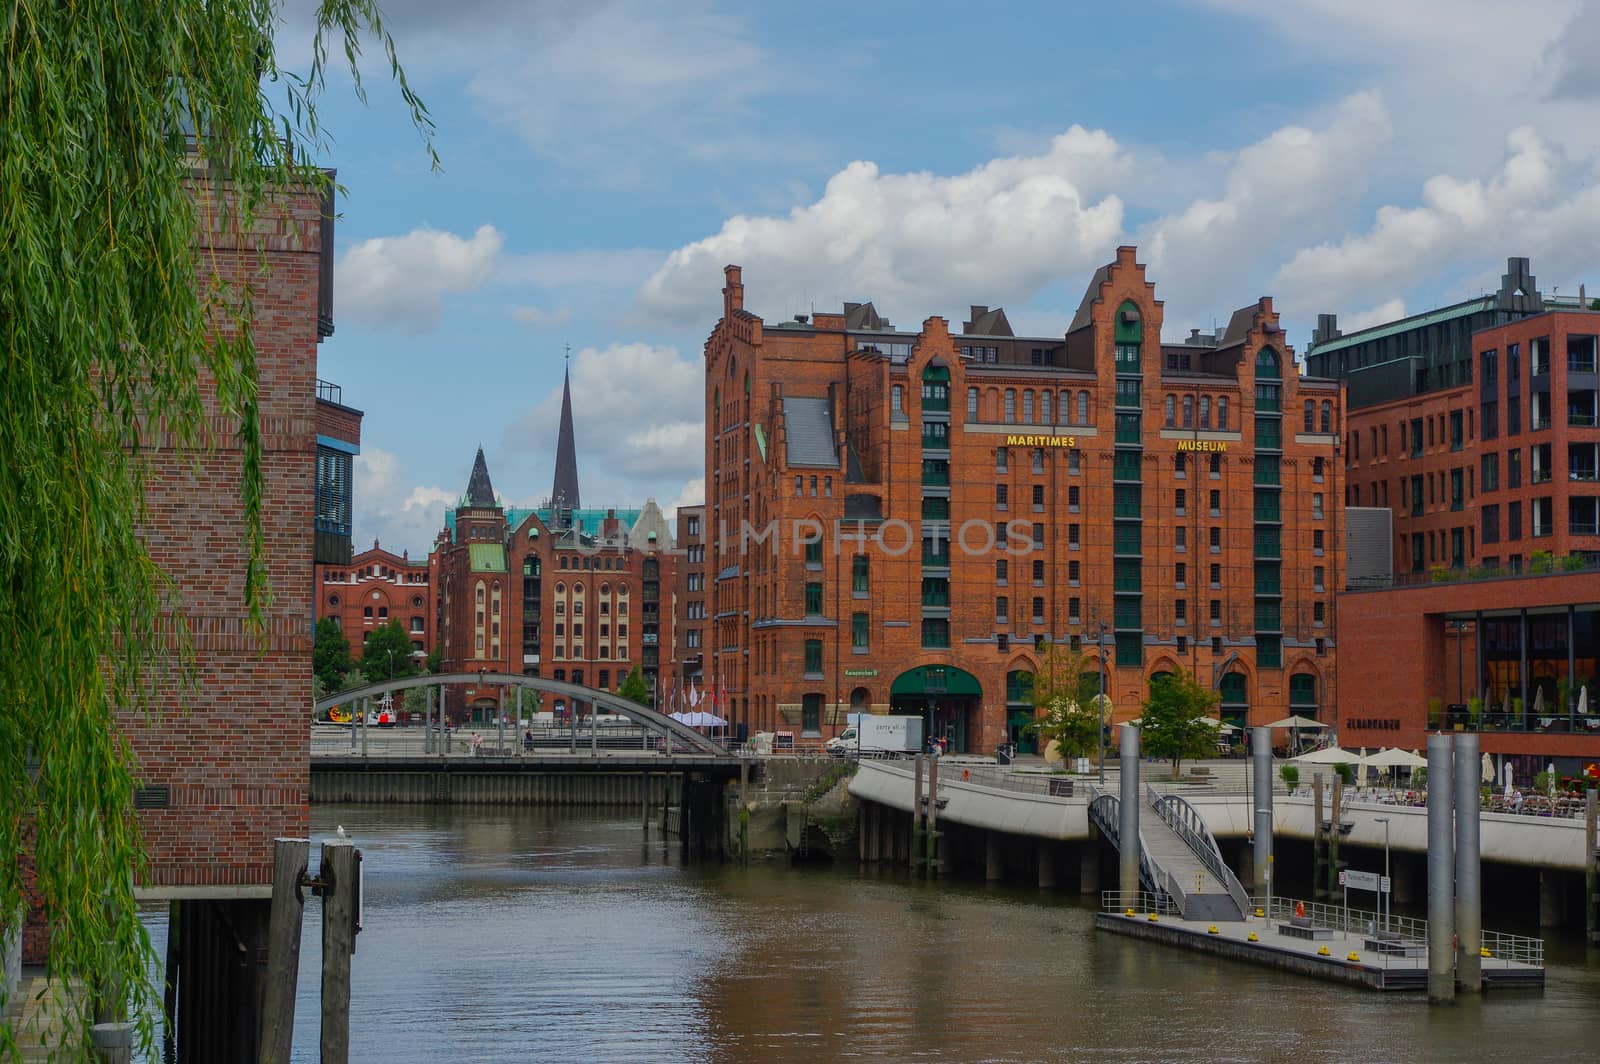 HAMBURG, GERMANY - JULY 18, 2015: a canal of Historic Speicherstadt houses and bridges at evening with amaising skyview over warehouses, famous place on Elbe river.